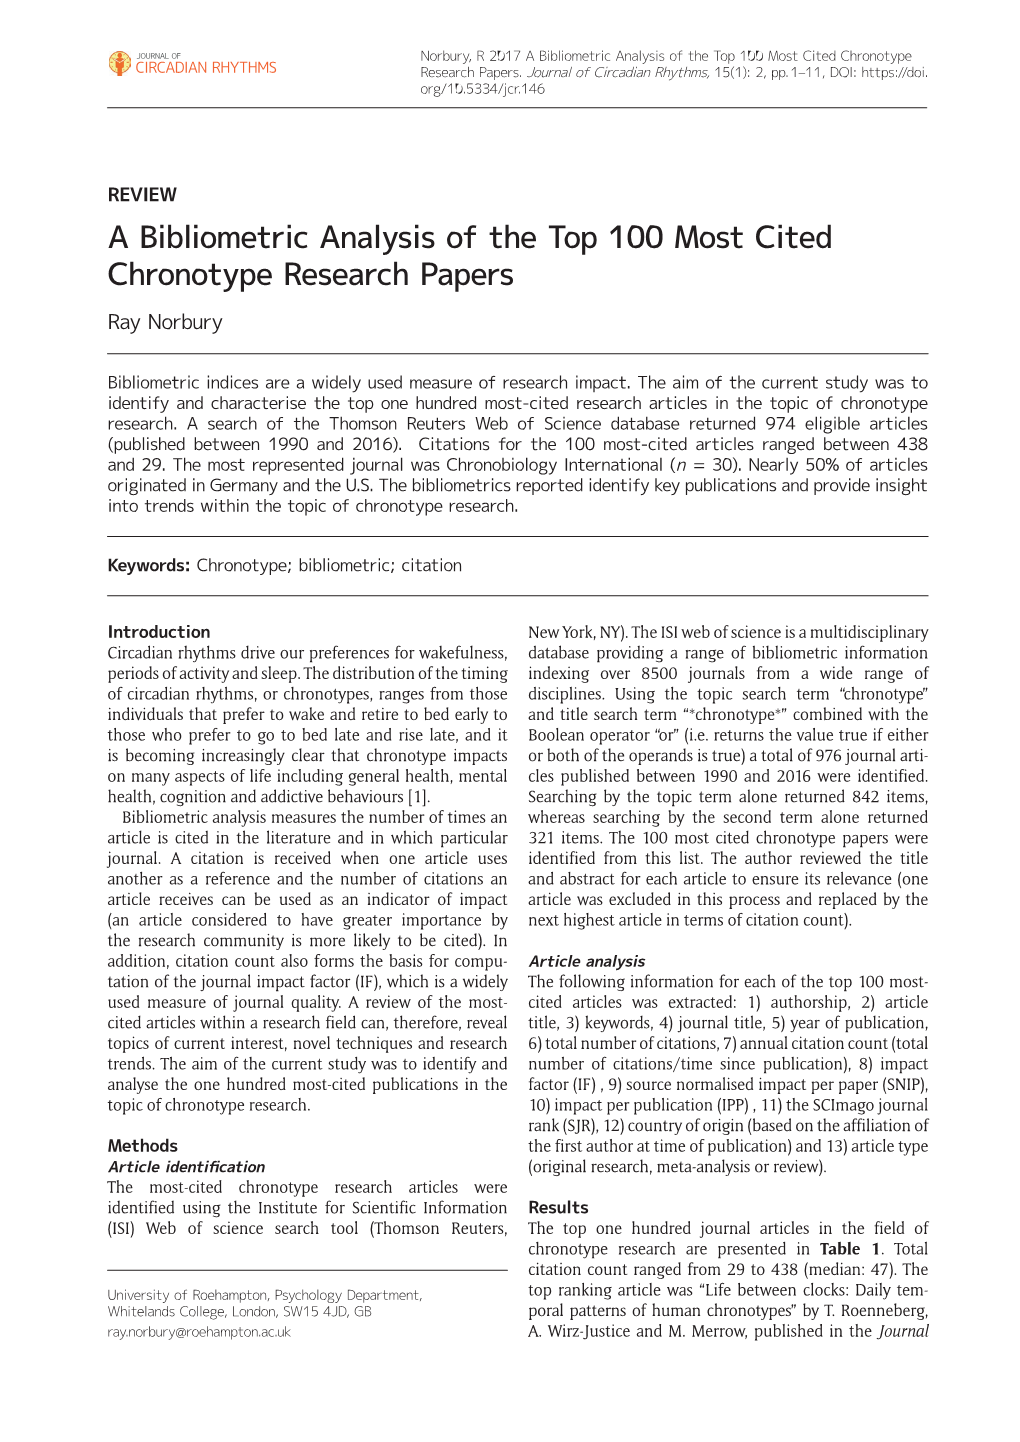 A Bibliometric Analysis of the Top 100 Most Cited Chronotype Research Papers Ray Norbury